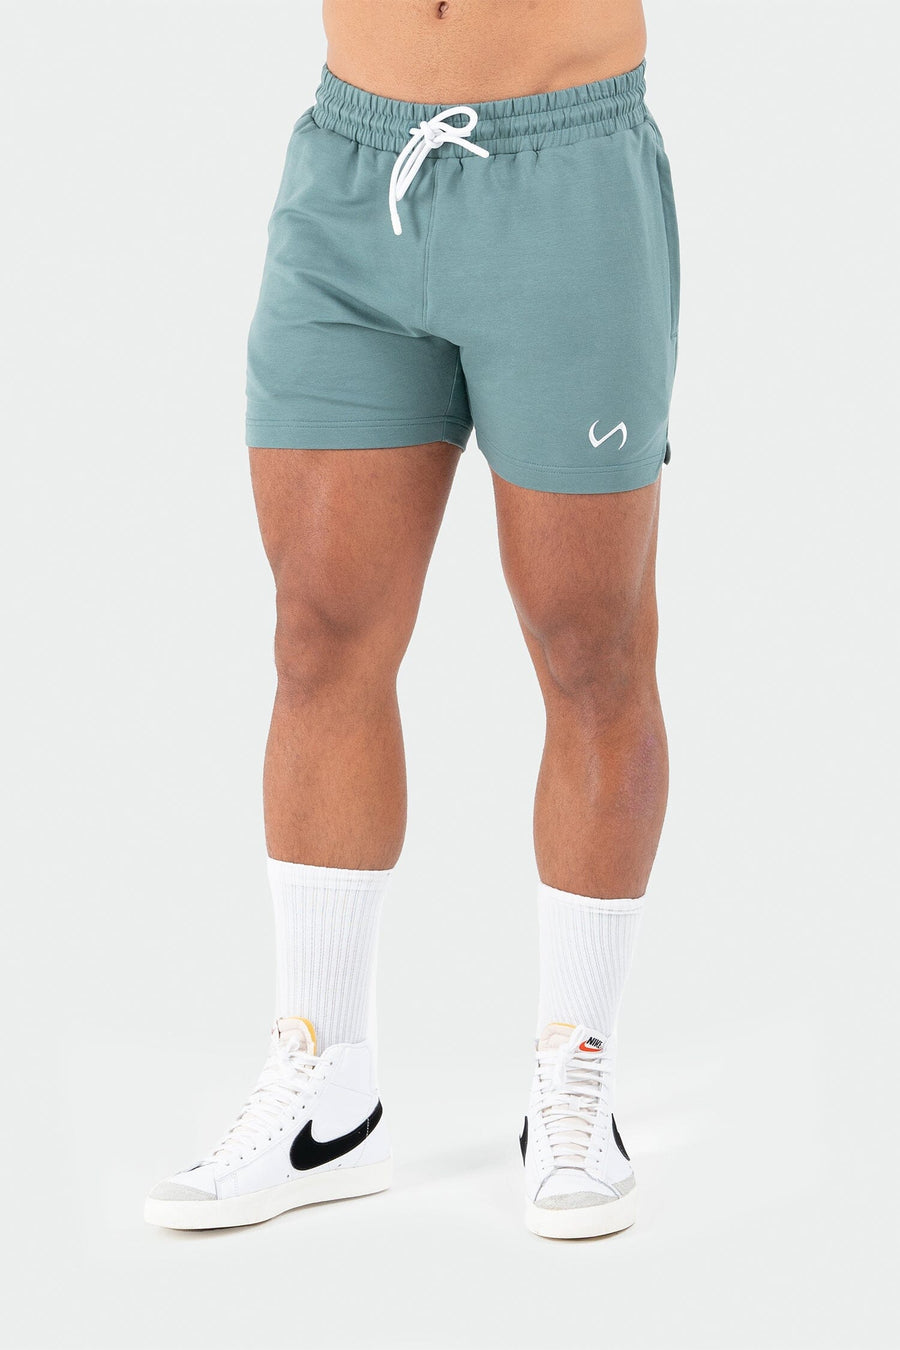 TLF Take Life Further 5 Inch - Lake - 1 Fitted Shorts